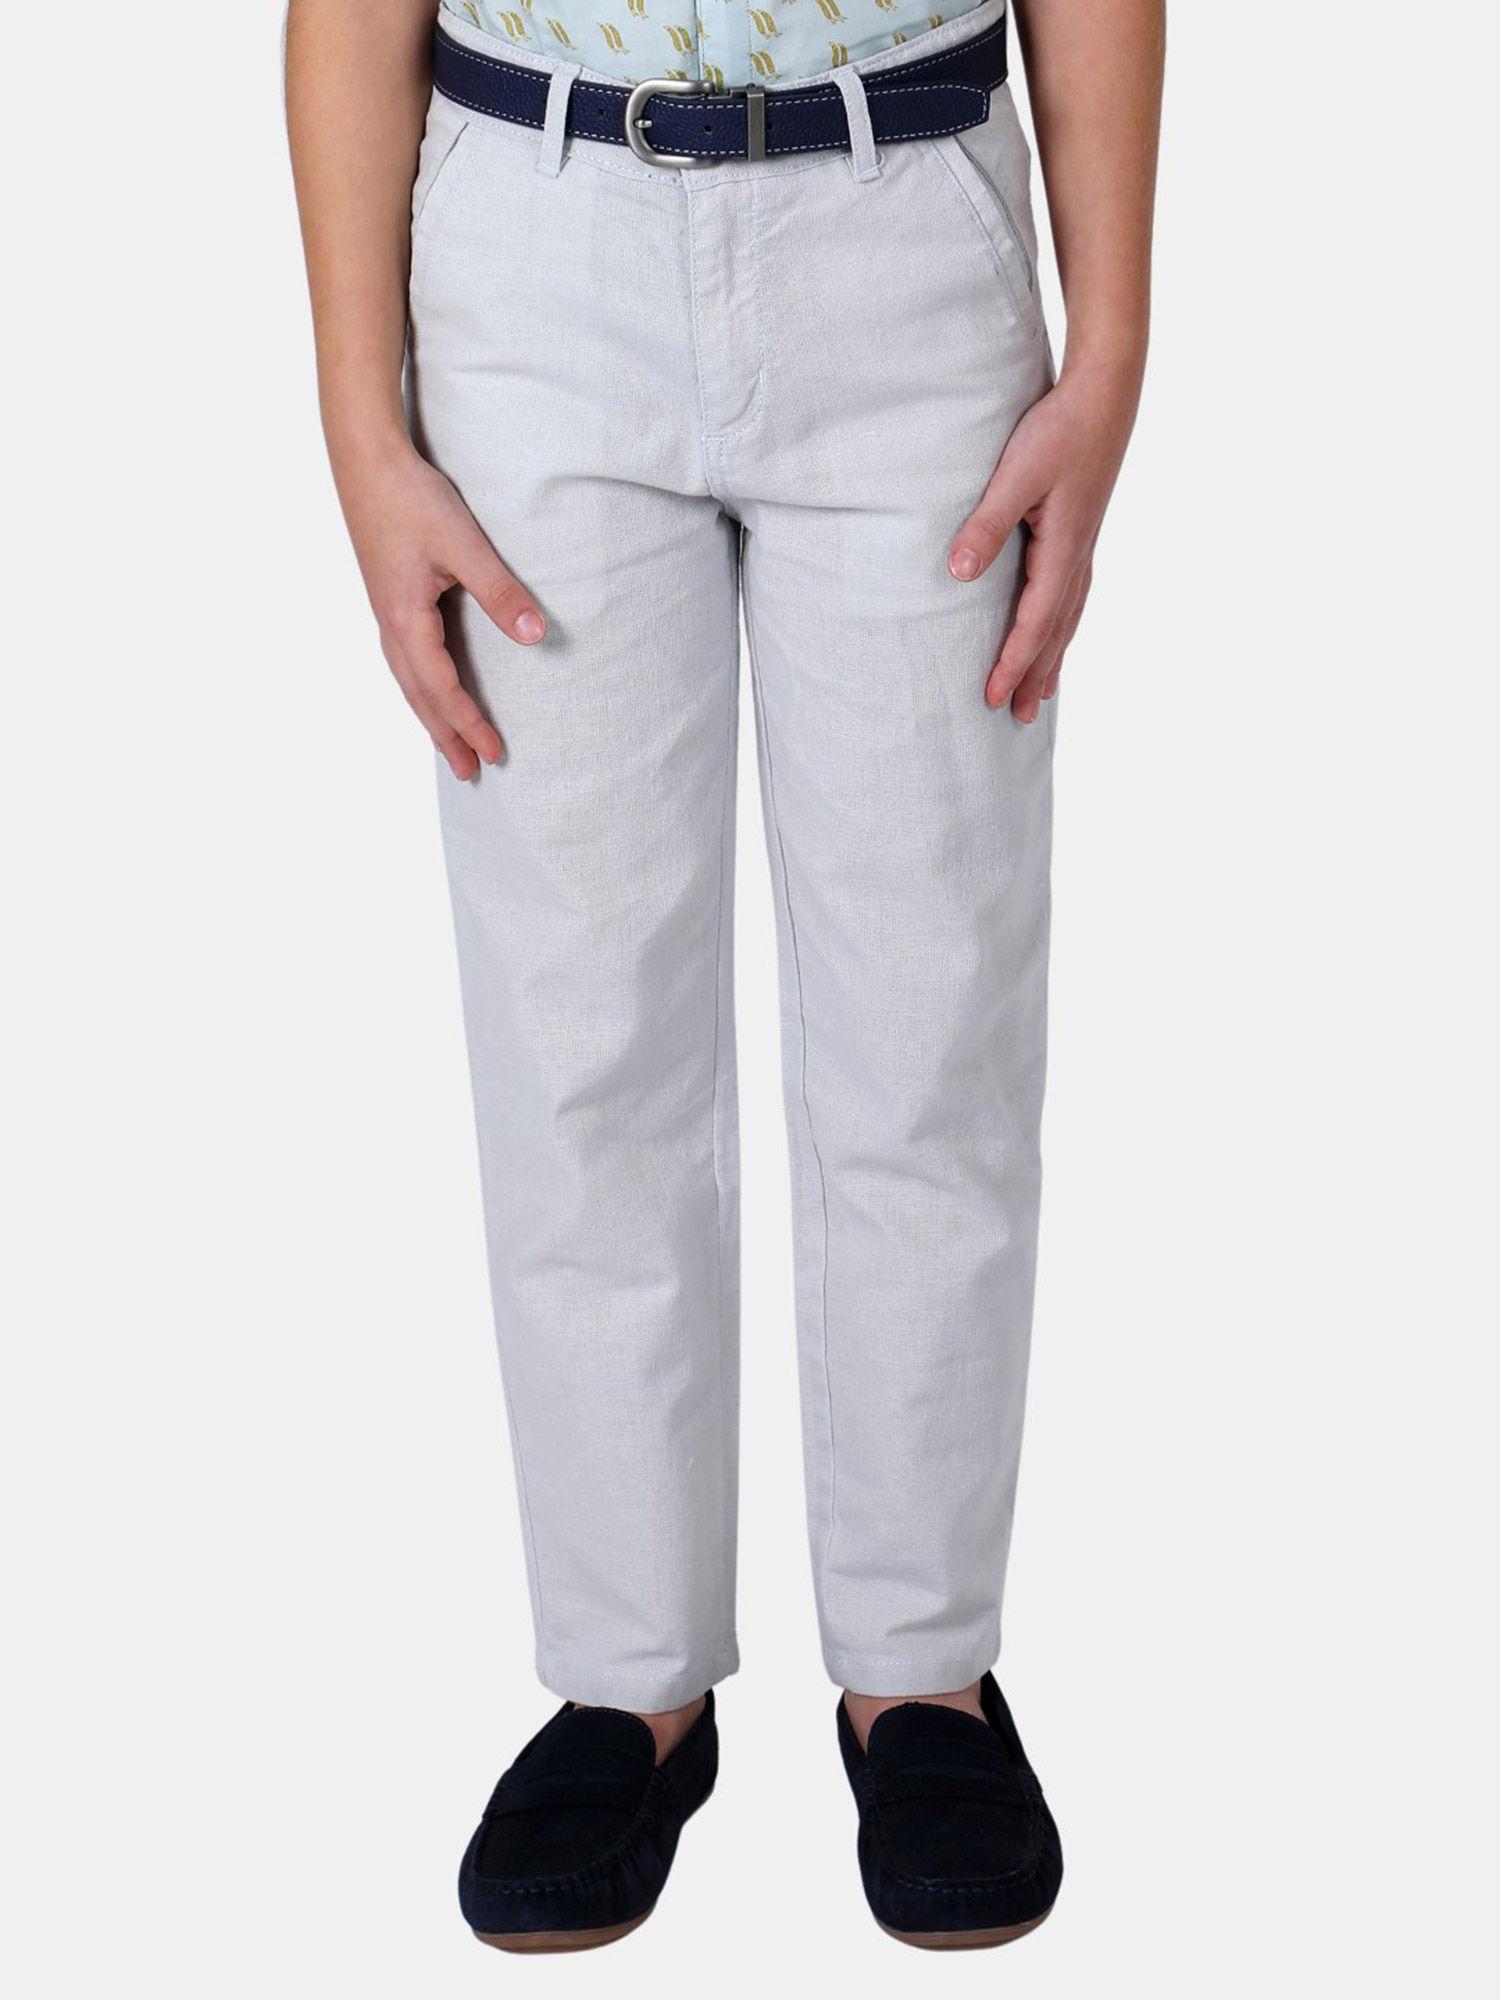 grey-solid-trouser